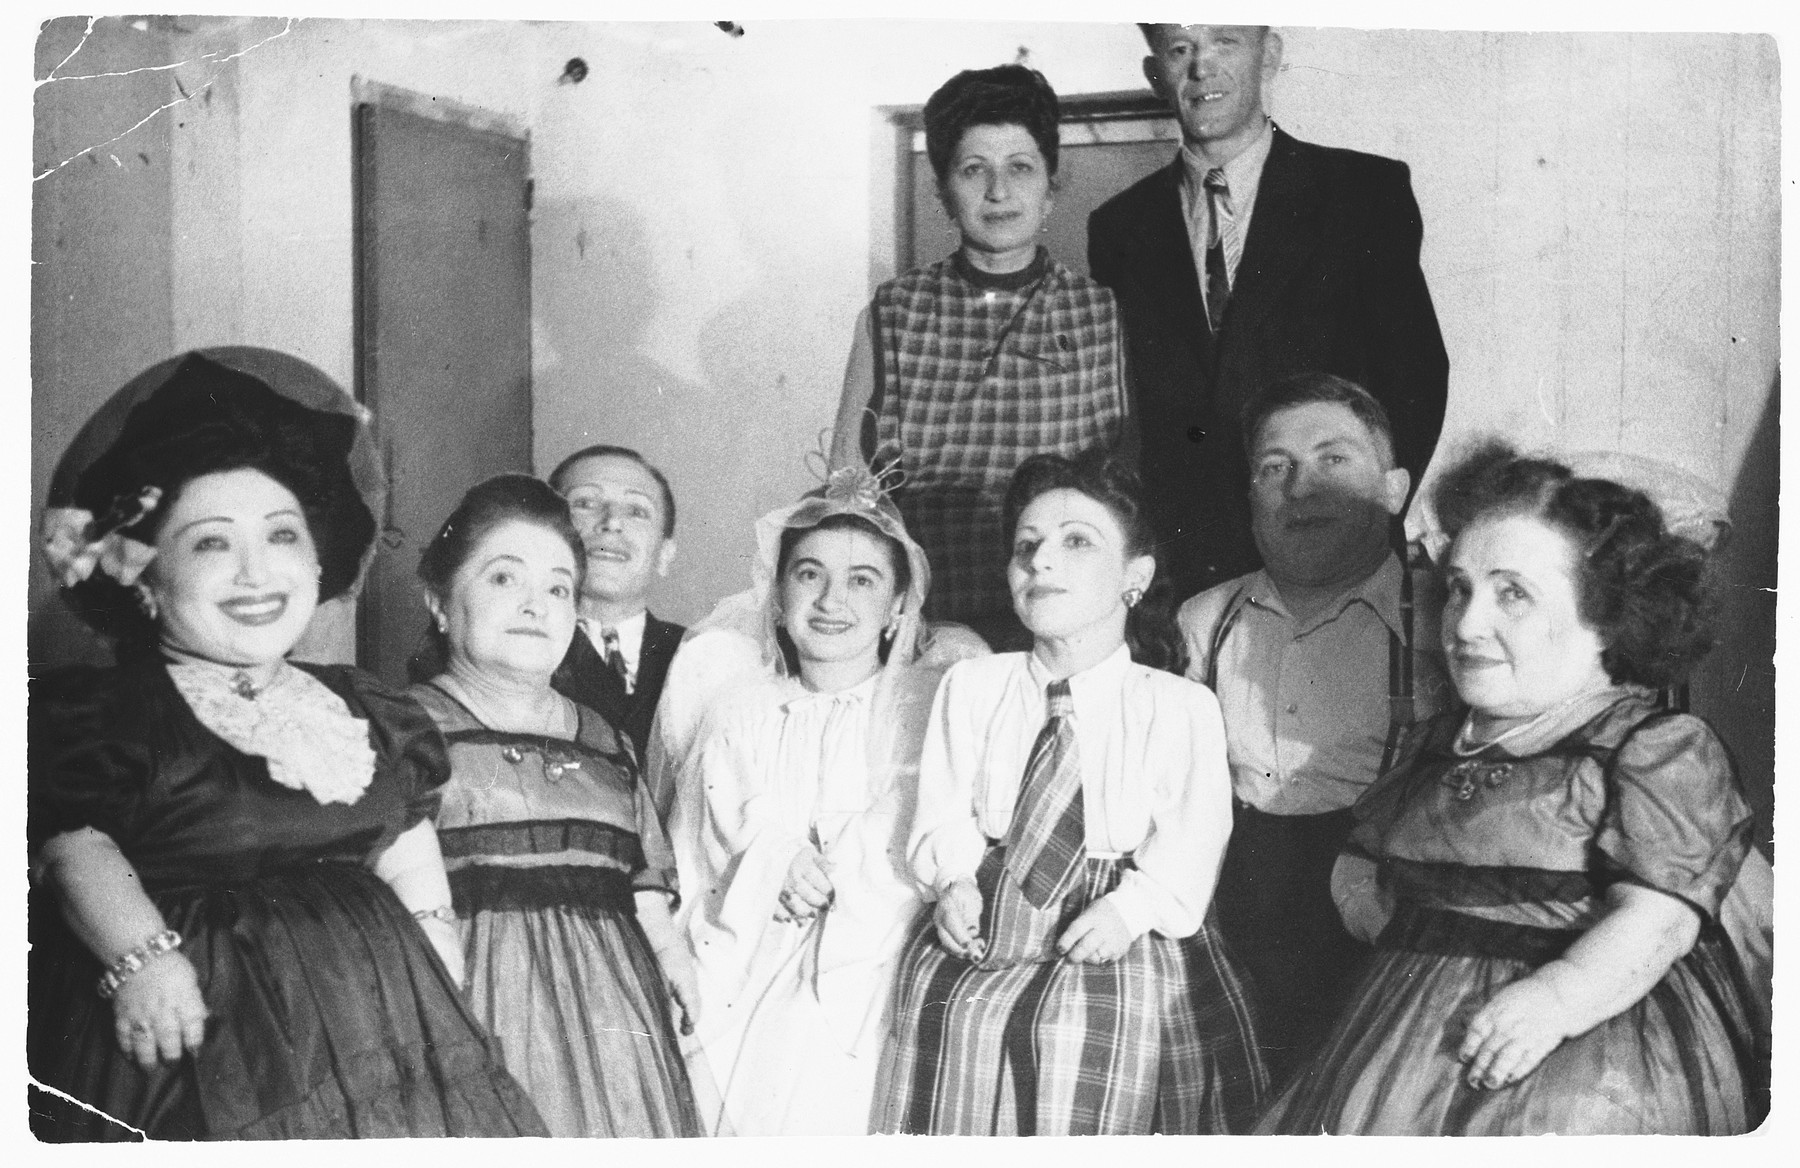 Group portrait of the Ovici family, a family of Jewish dwarf entertainers who survived Auschwitz.

The two people of normal height standing in the back are their sister Sara Ovici, and Moshe Moskowitz, the husband of Elisabeth Ovici.